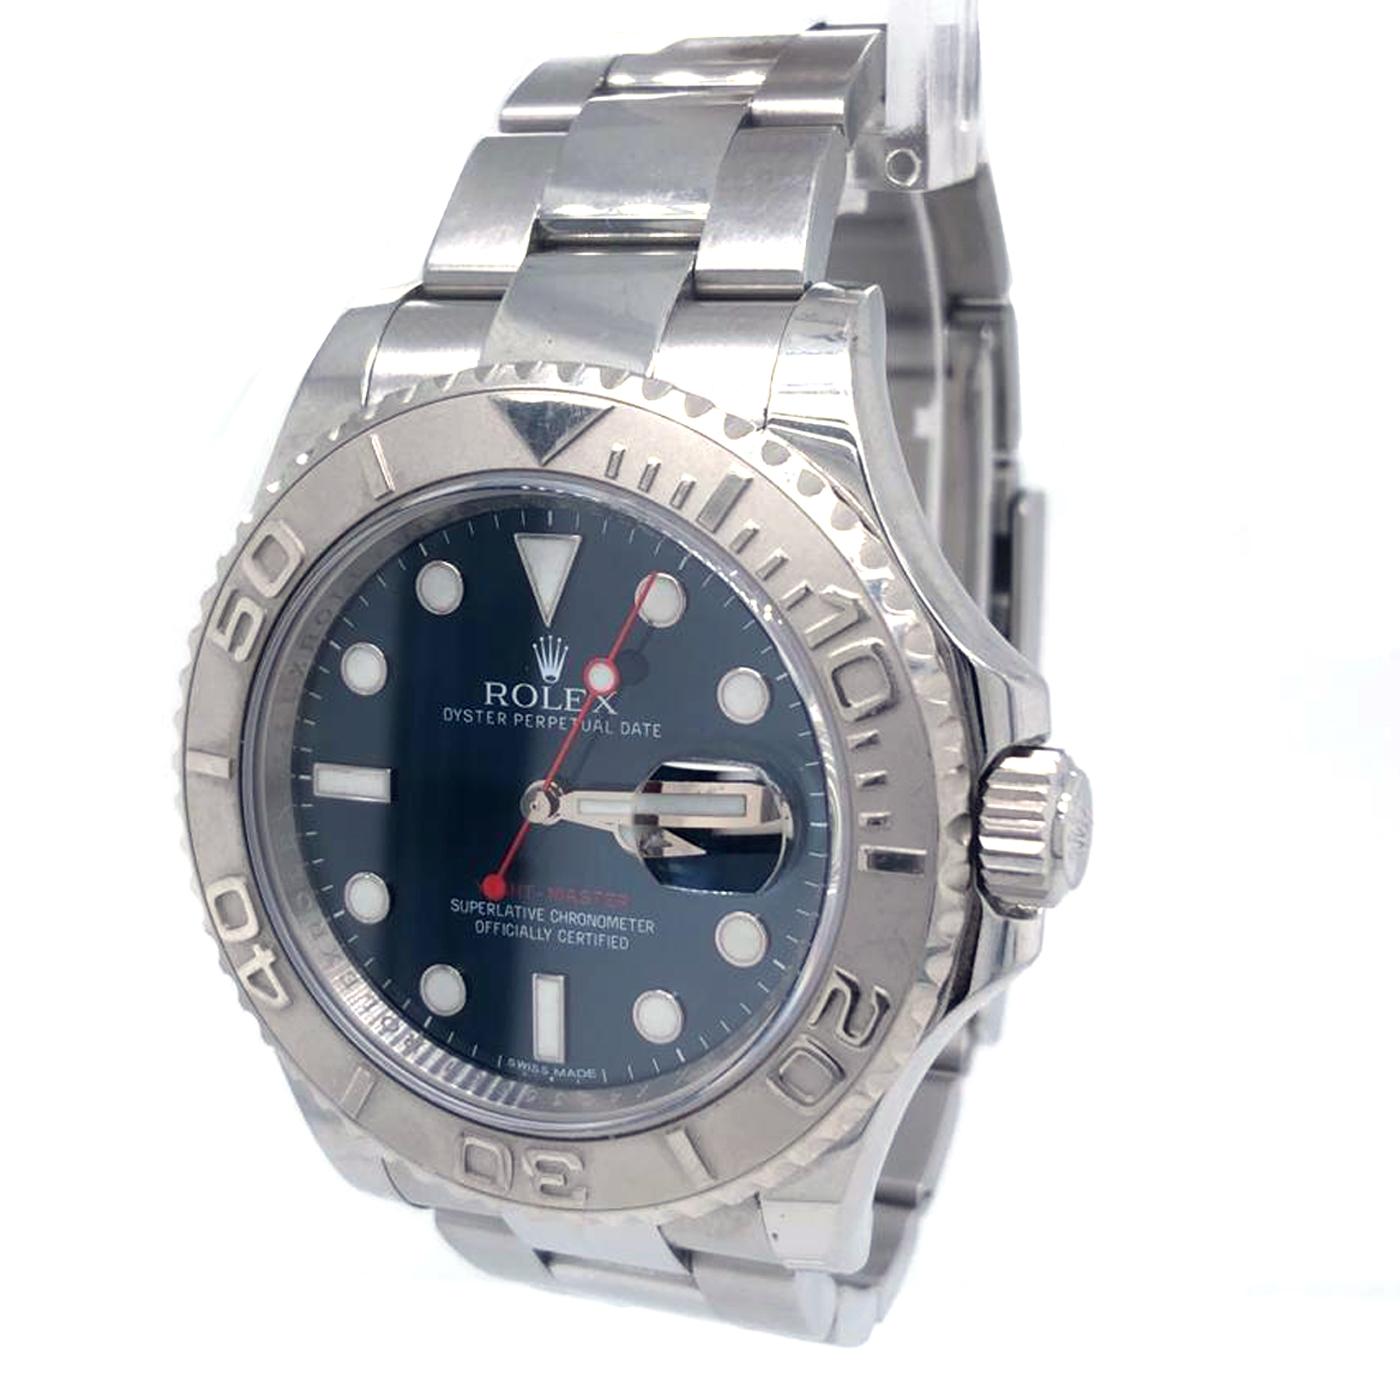 Rolex Yachtmaster 116622 Men Watch. 40mm Stainless Steel case. Platinum Bidirectional bezel. Blue dial with Luminous Steel hands and index, dot hour markers. Minute markers on the outer dial. Date display at the 3 o'clock position. Stainless Steel